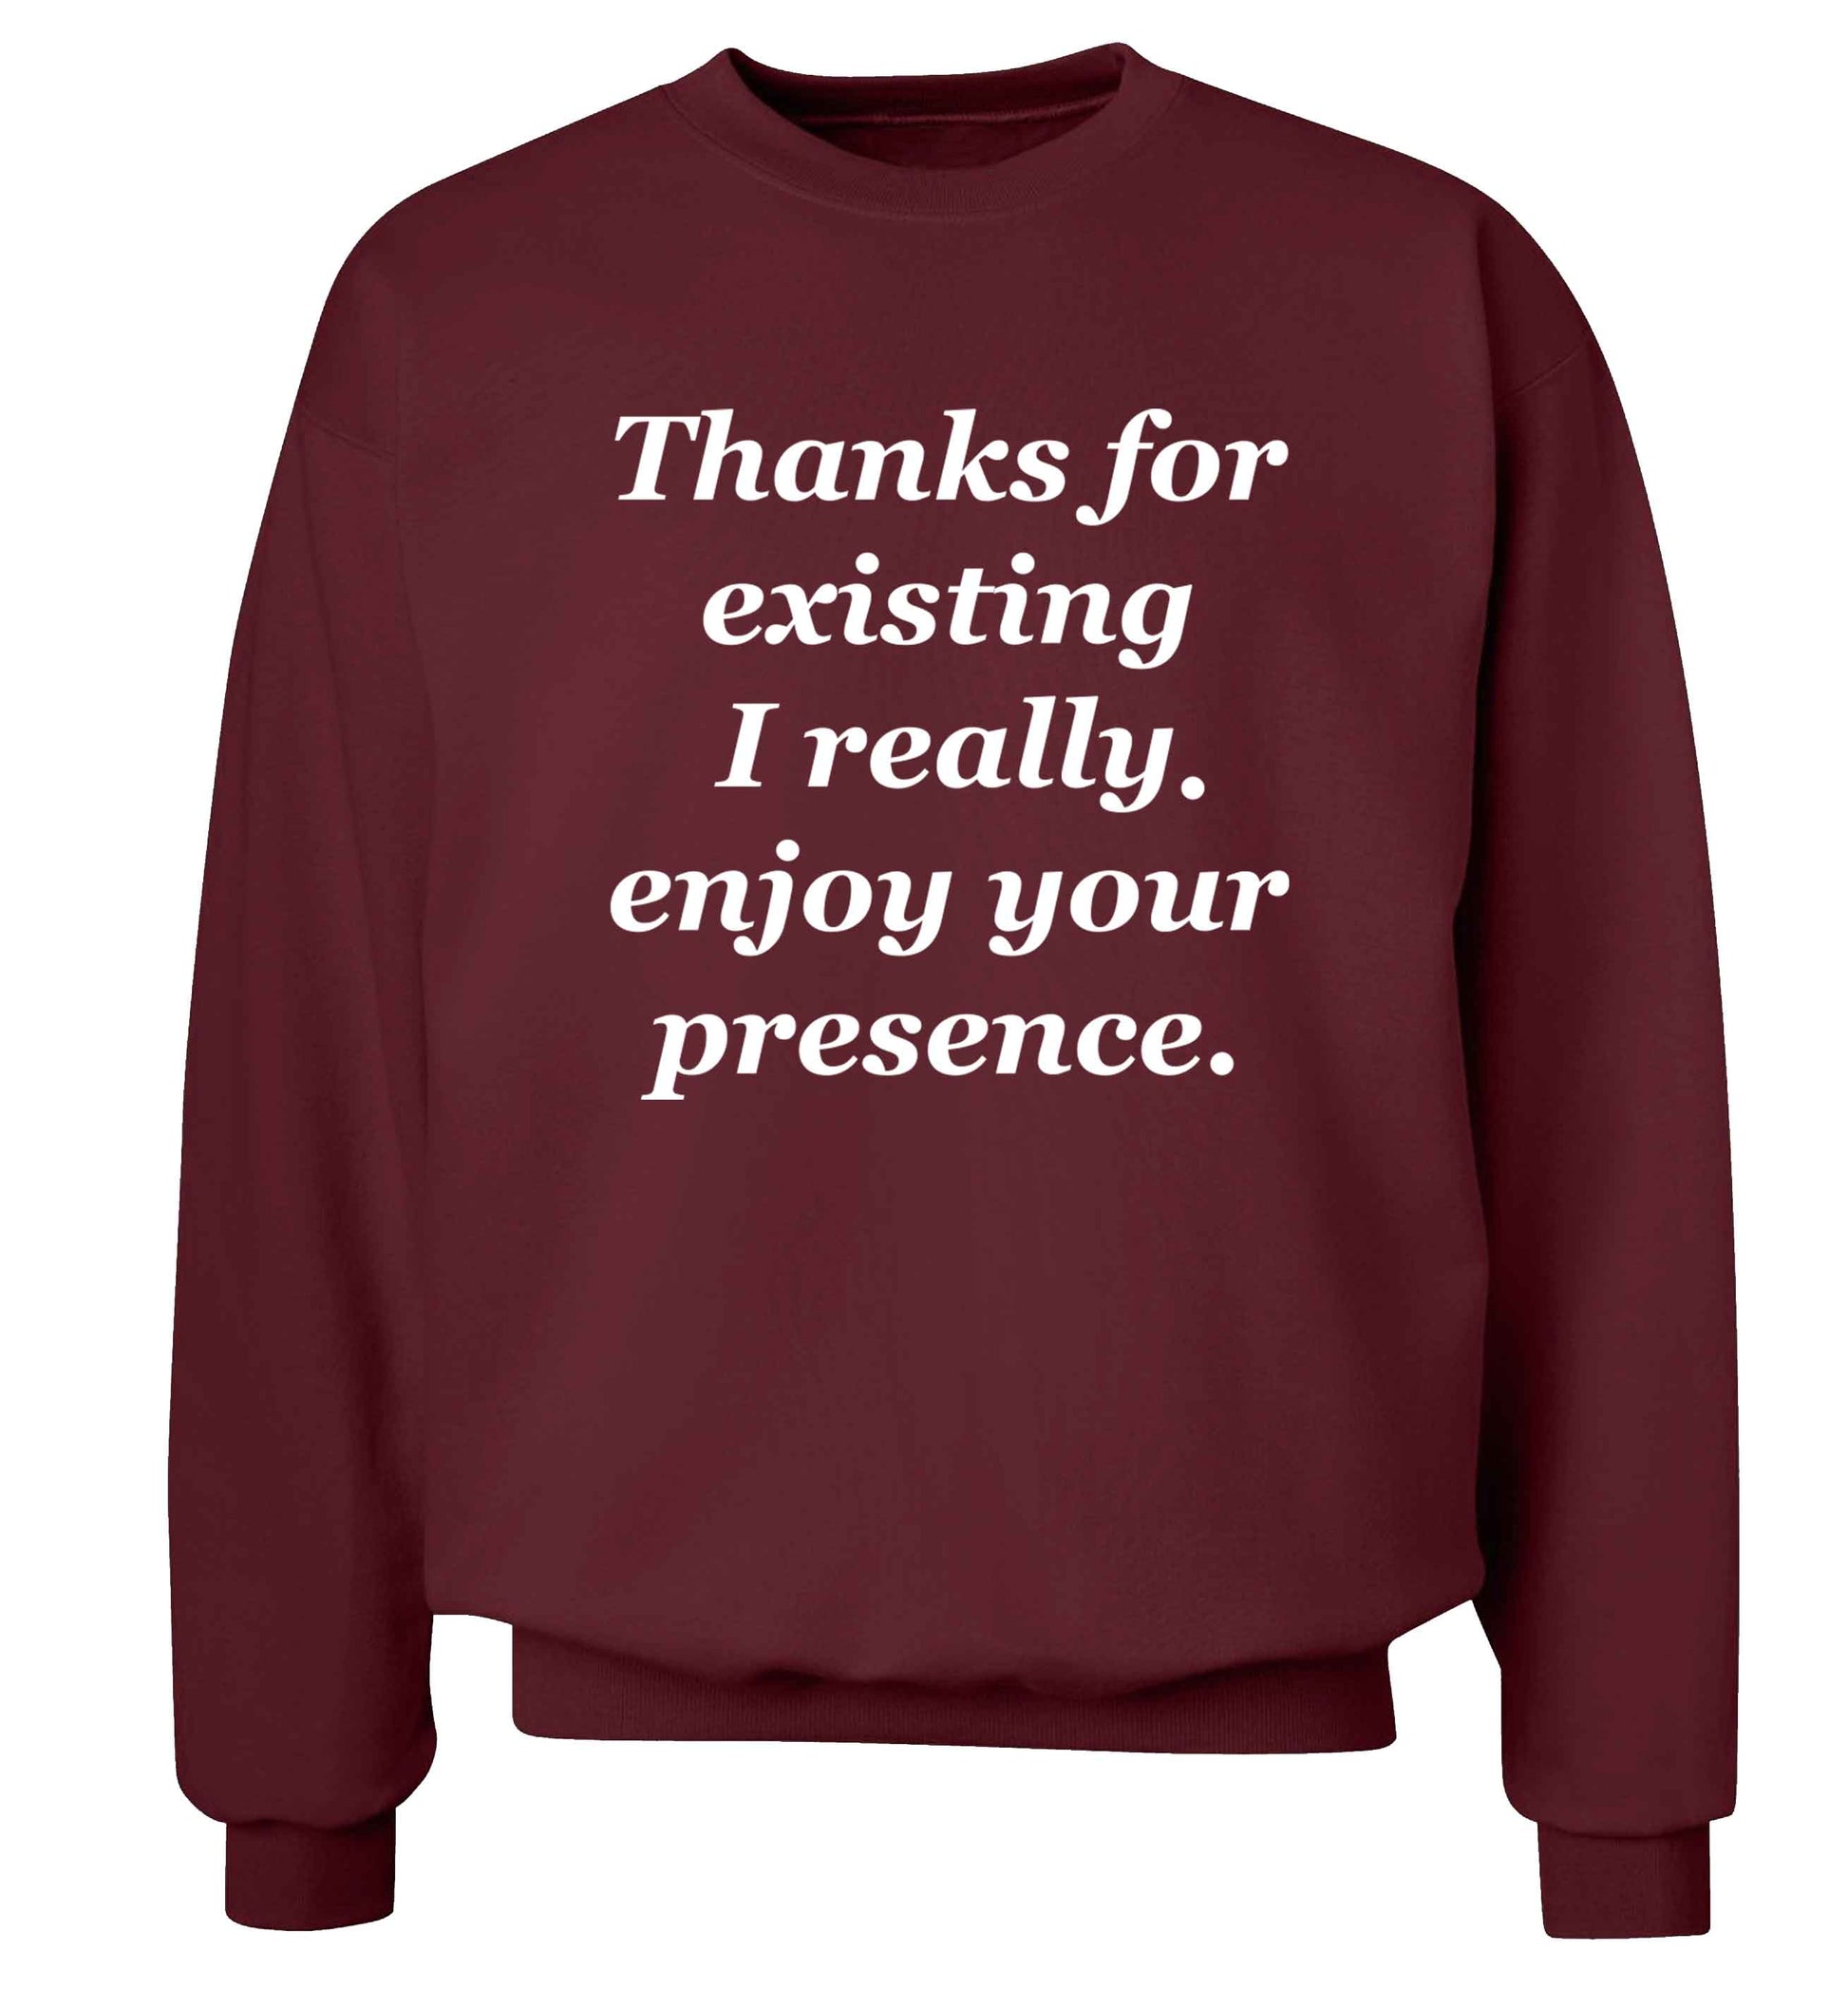 Thanks for existing I really enjoy your presence Adult's unisex maroon Sweater 2XL